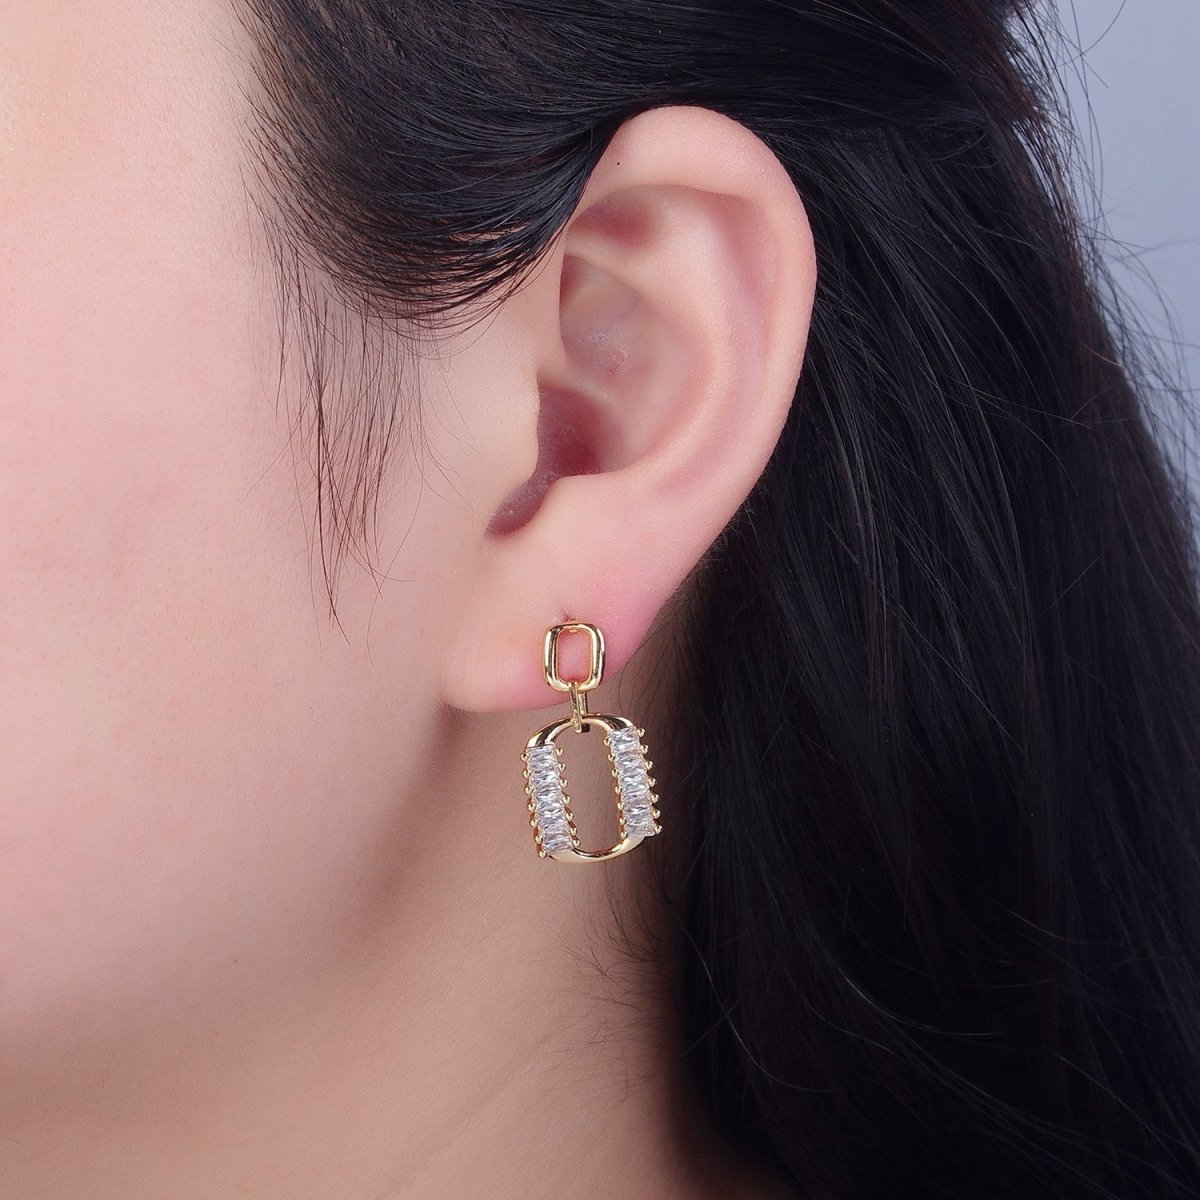 Dainty Gold Rectangle Post Earring with Clear Baguette Drop Earring Stud V-437 - DLUXCA